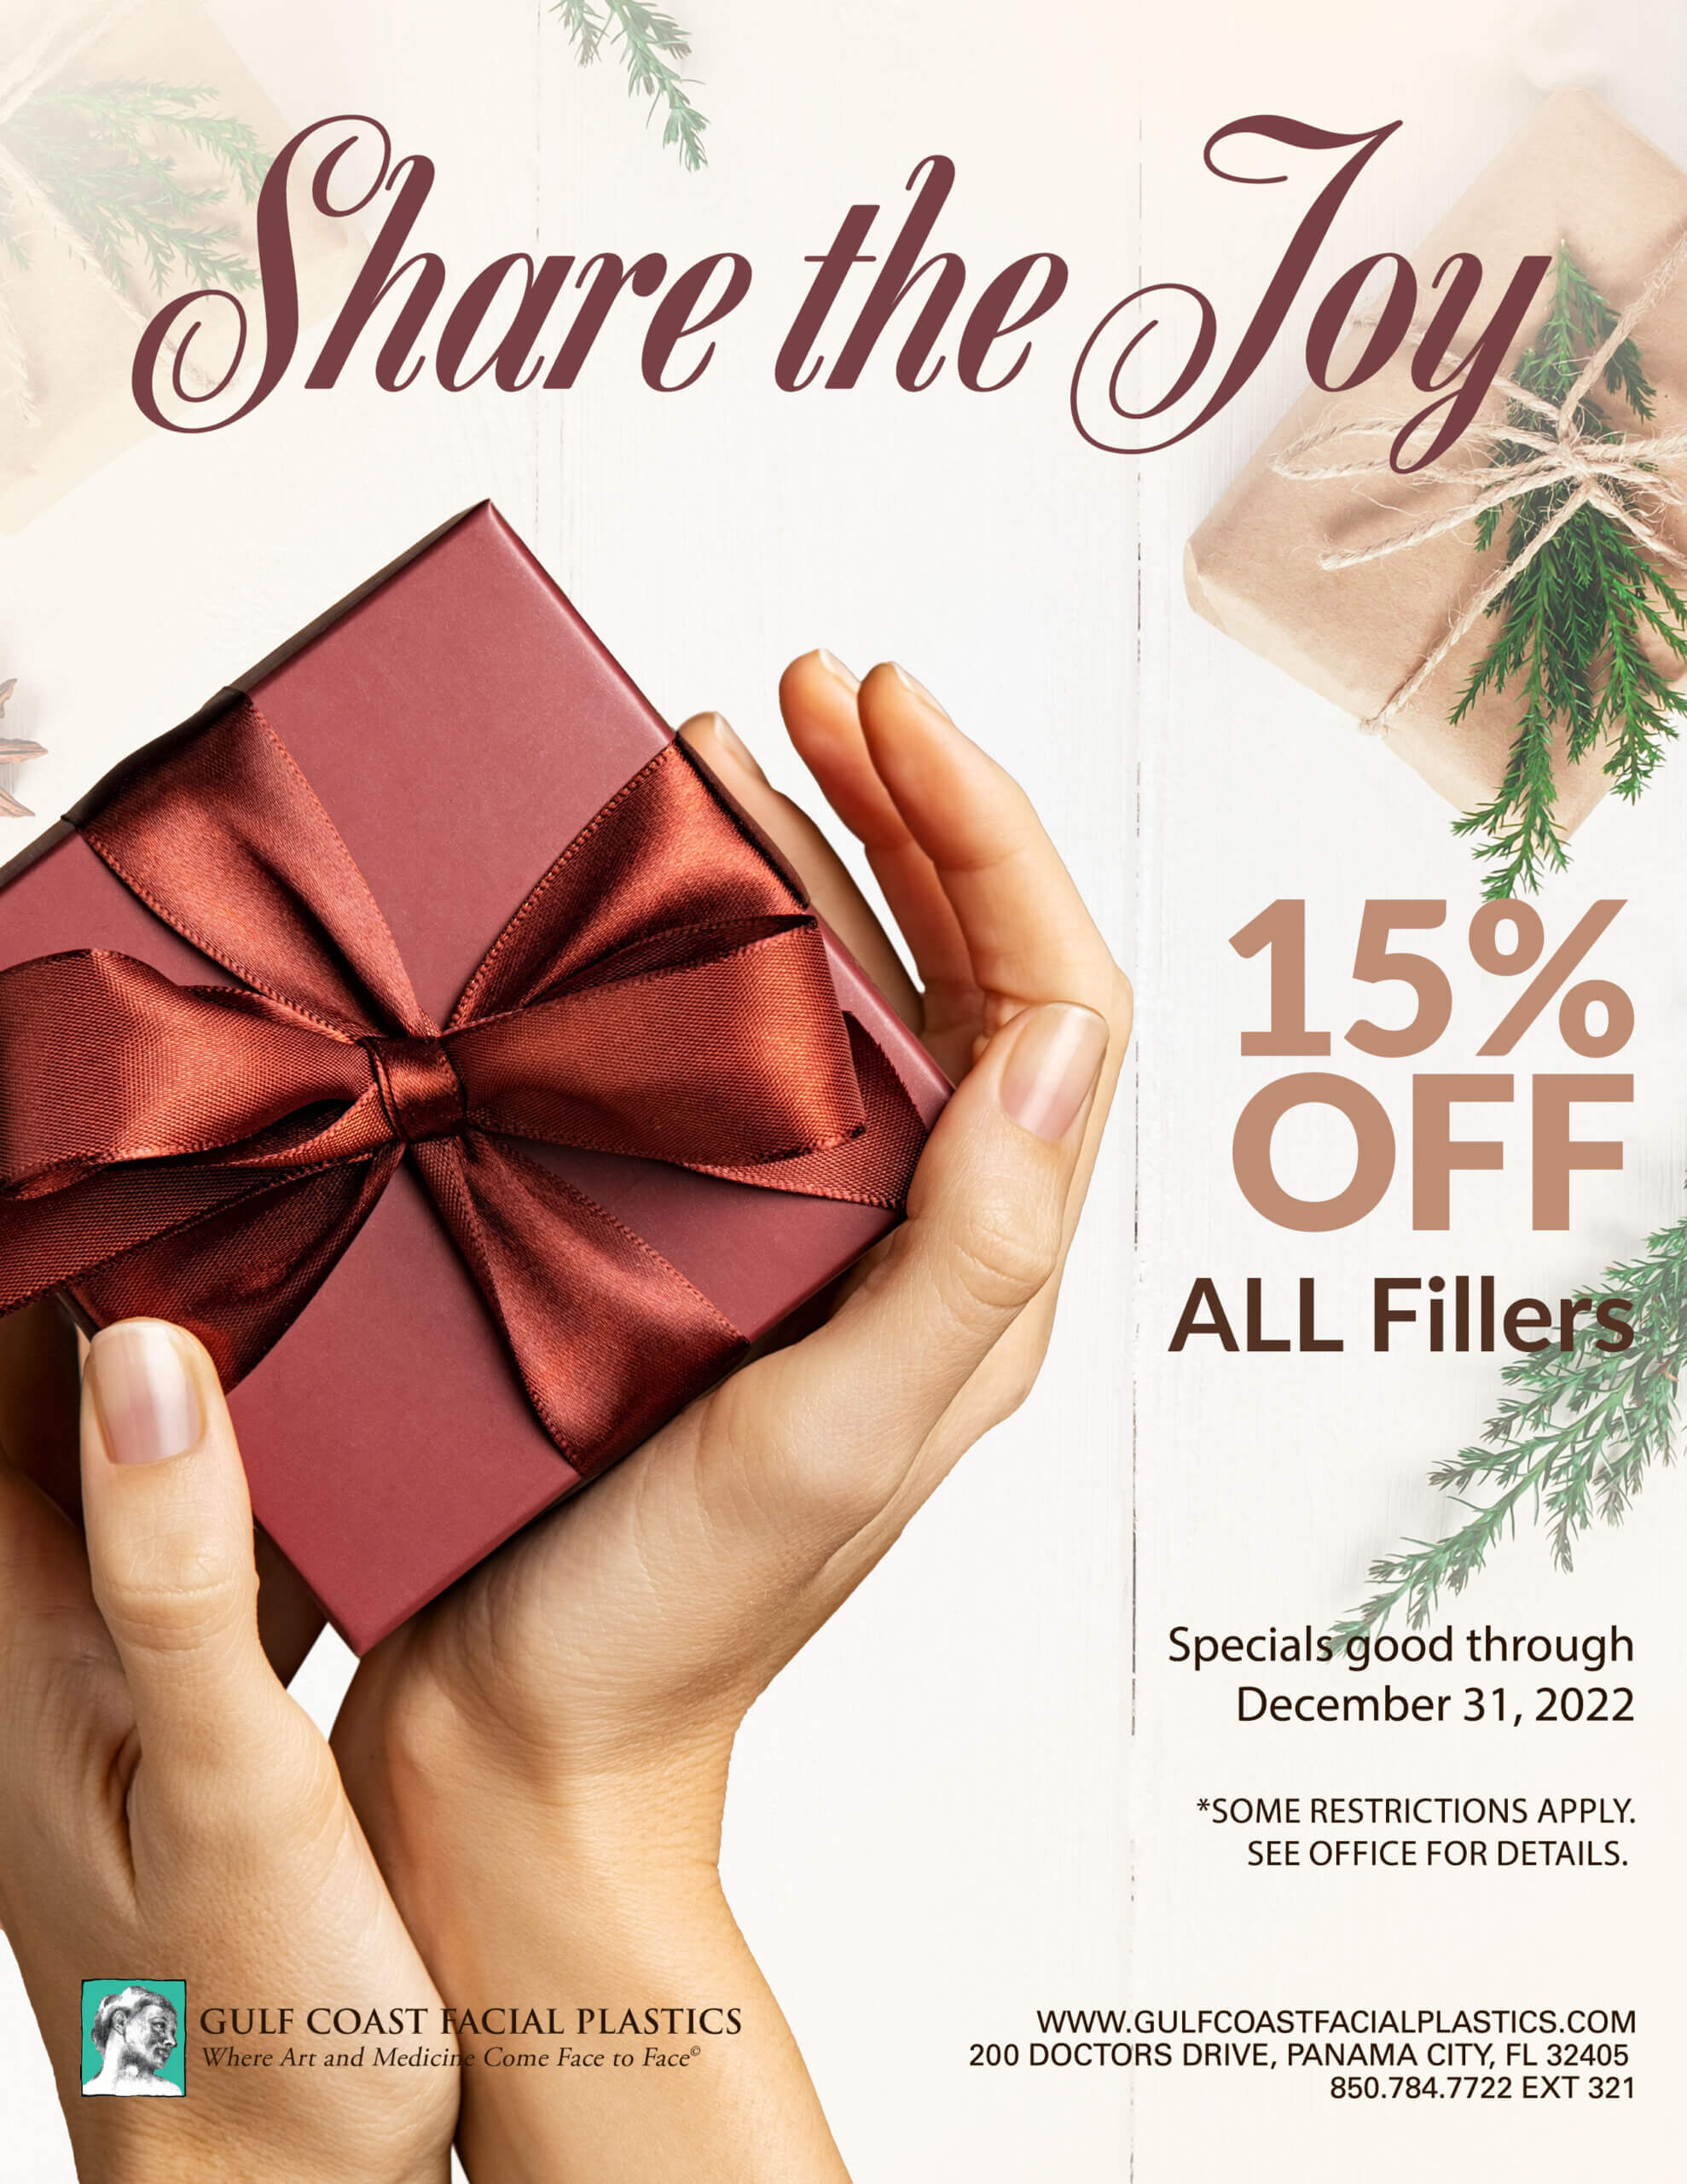 Share the joy with 15% OFF all fillers in the month of December.